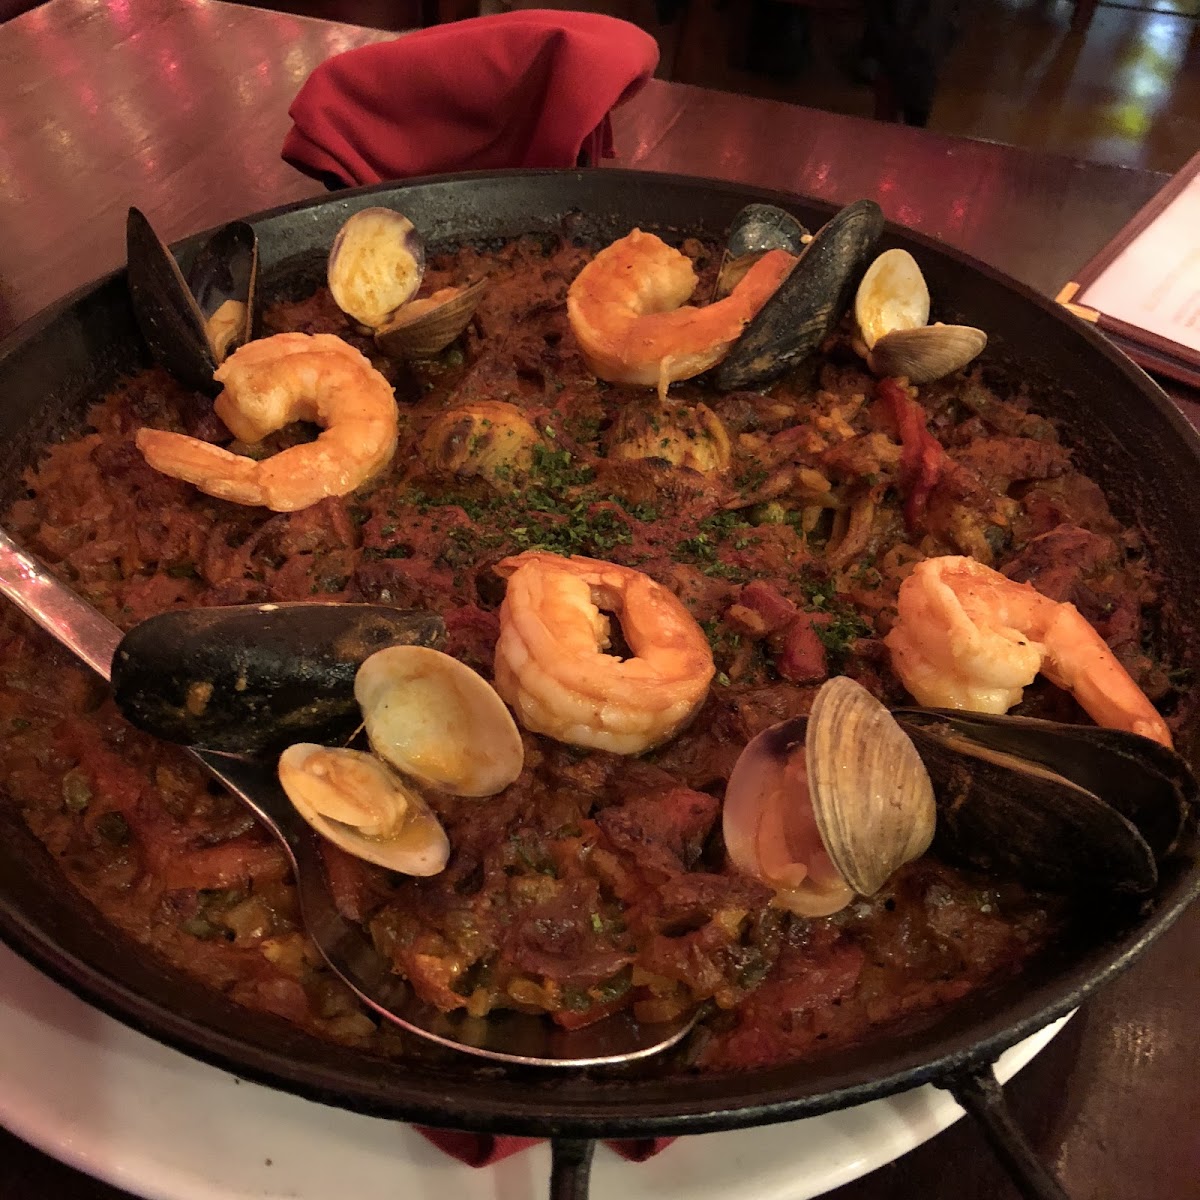 All of their Paella’s are Gluten Free!